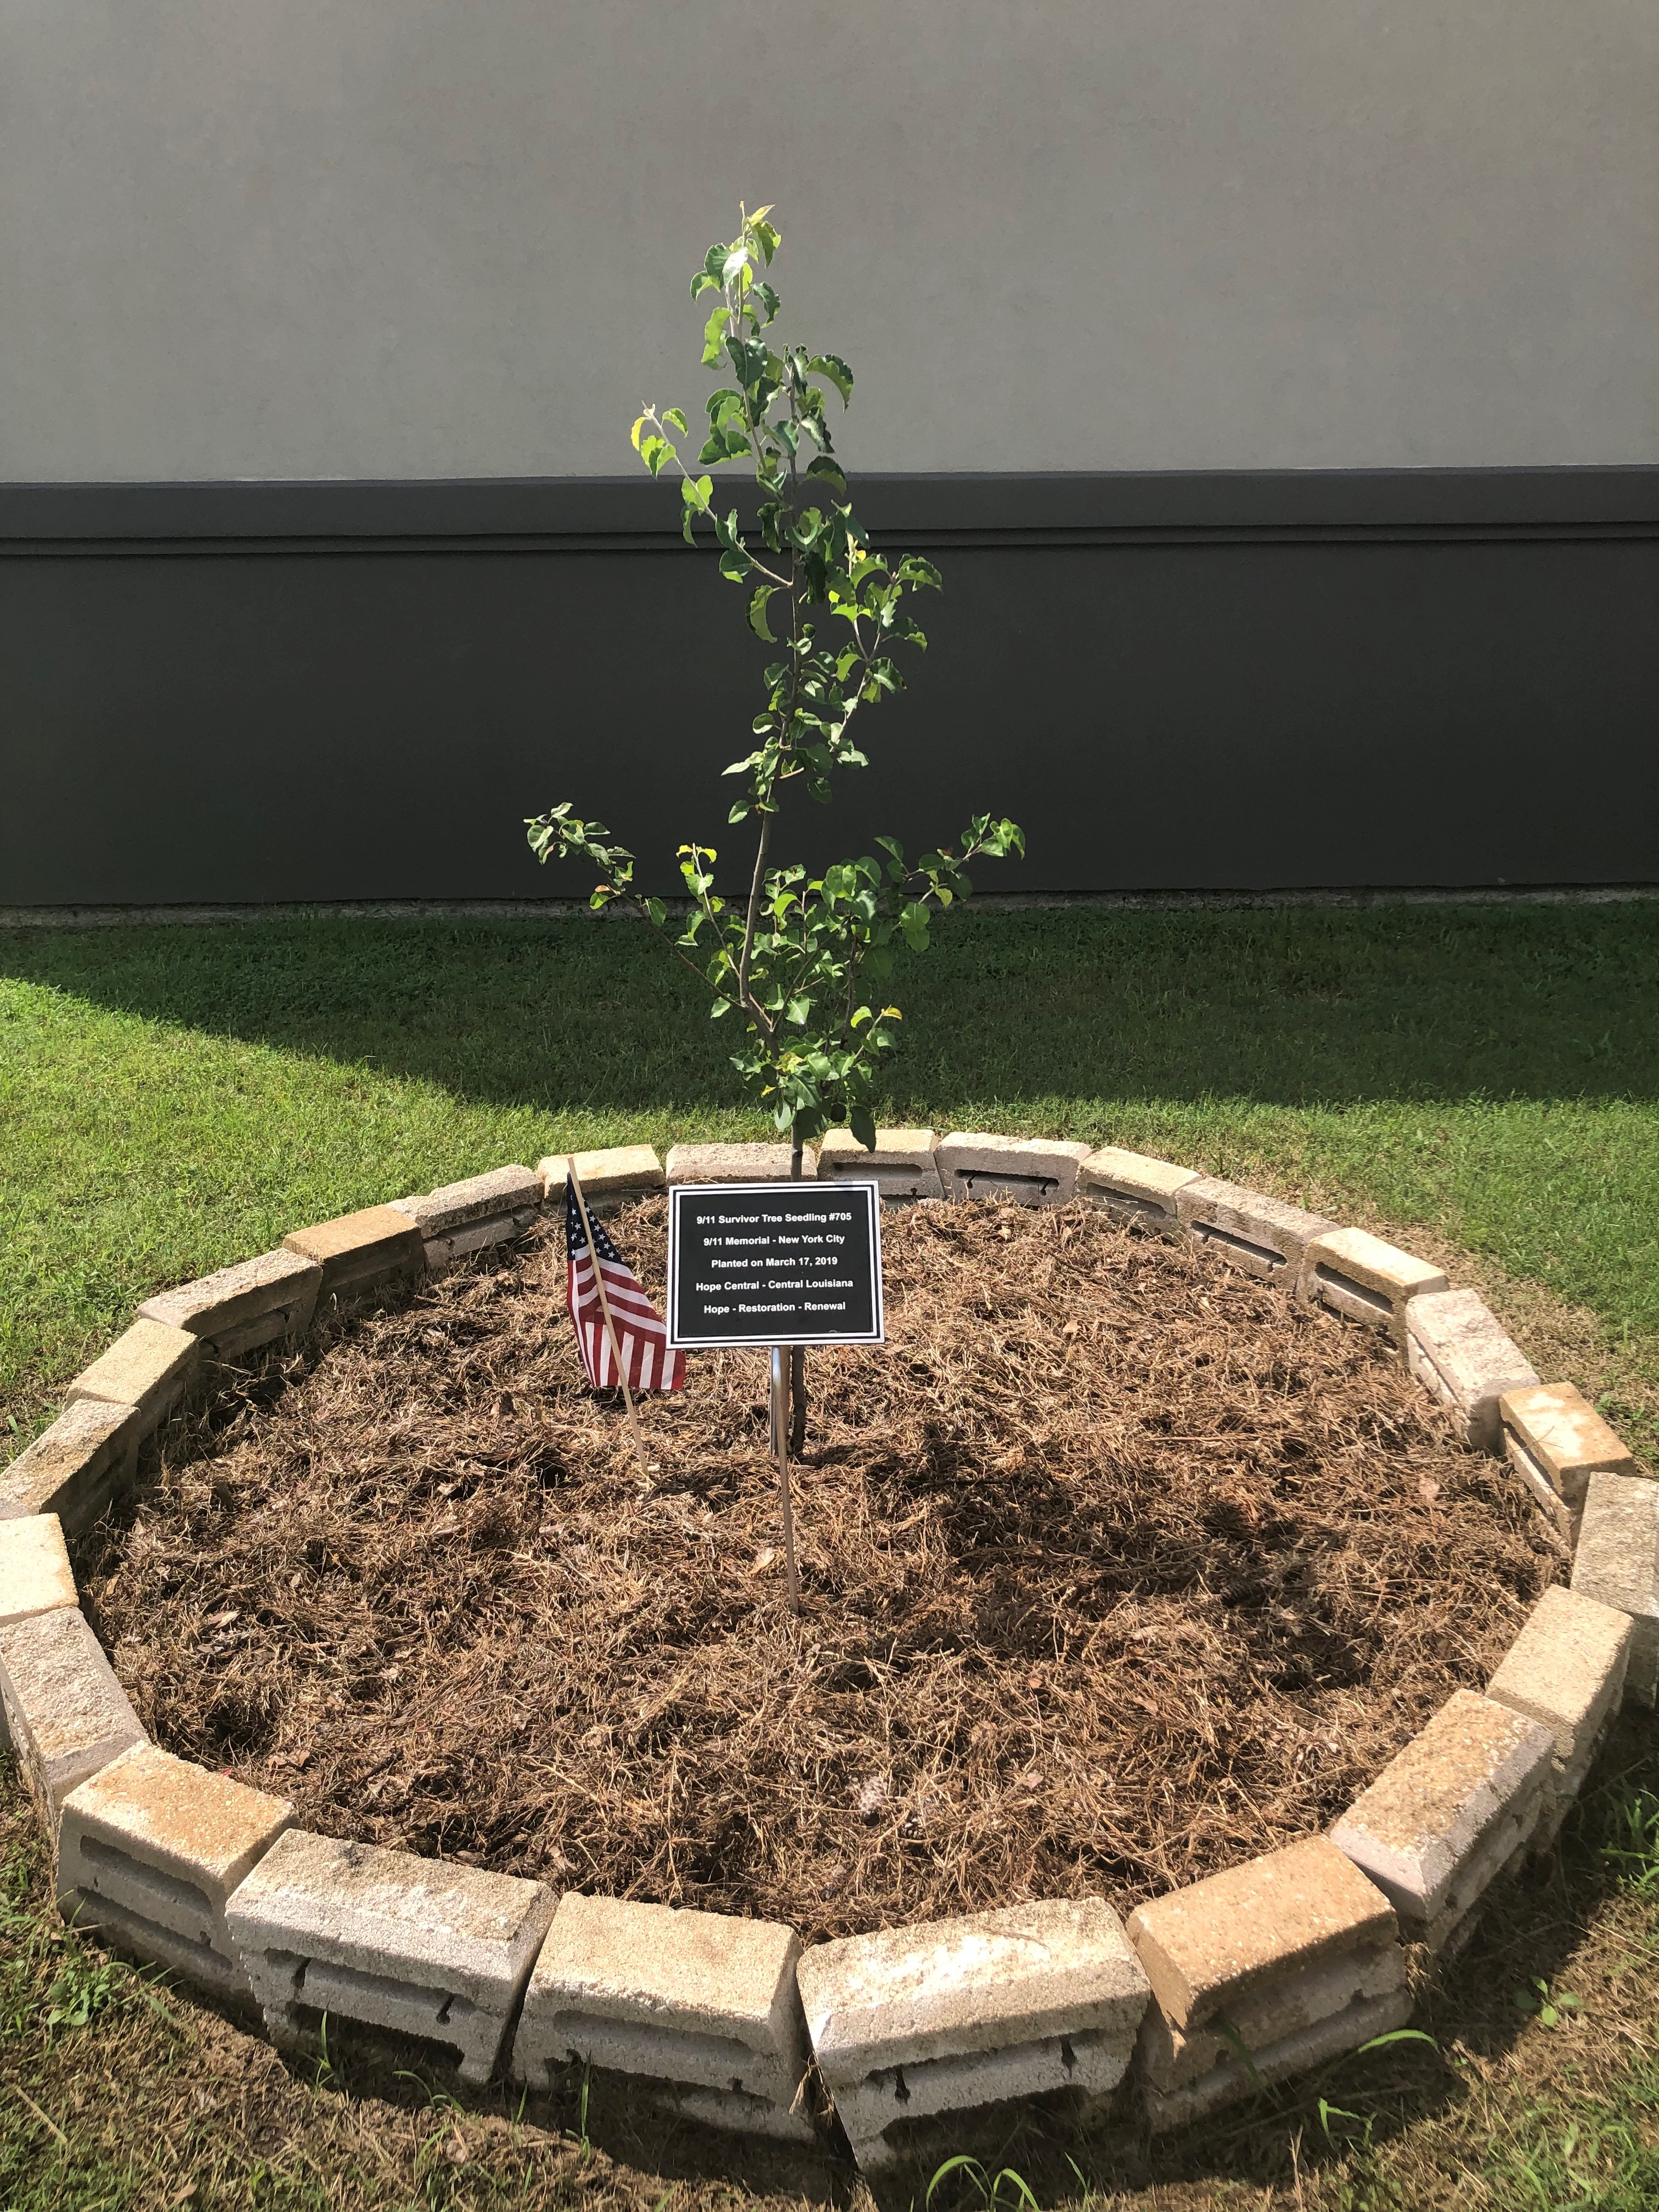 9/11 Memorial & Museum on X: The Survivor Tree is a symbol of hope,  healing and resilience. Each year, seedlings from the Survivor Tree are  given to communities affected by violence and